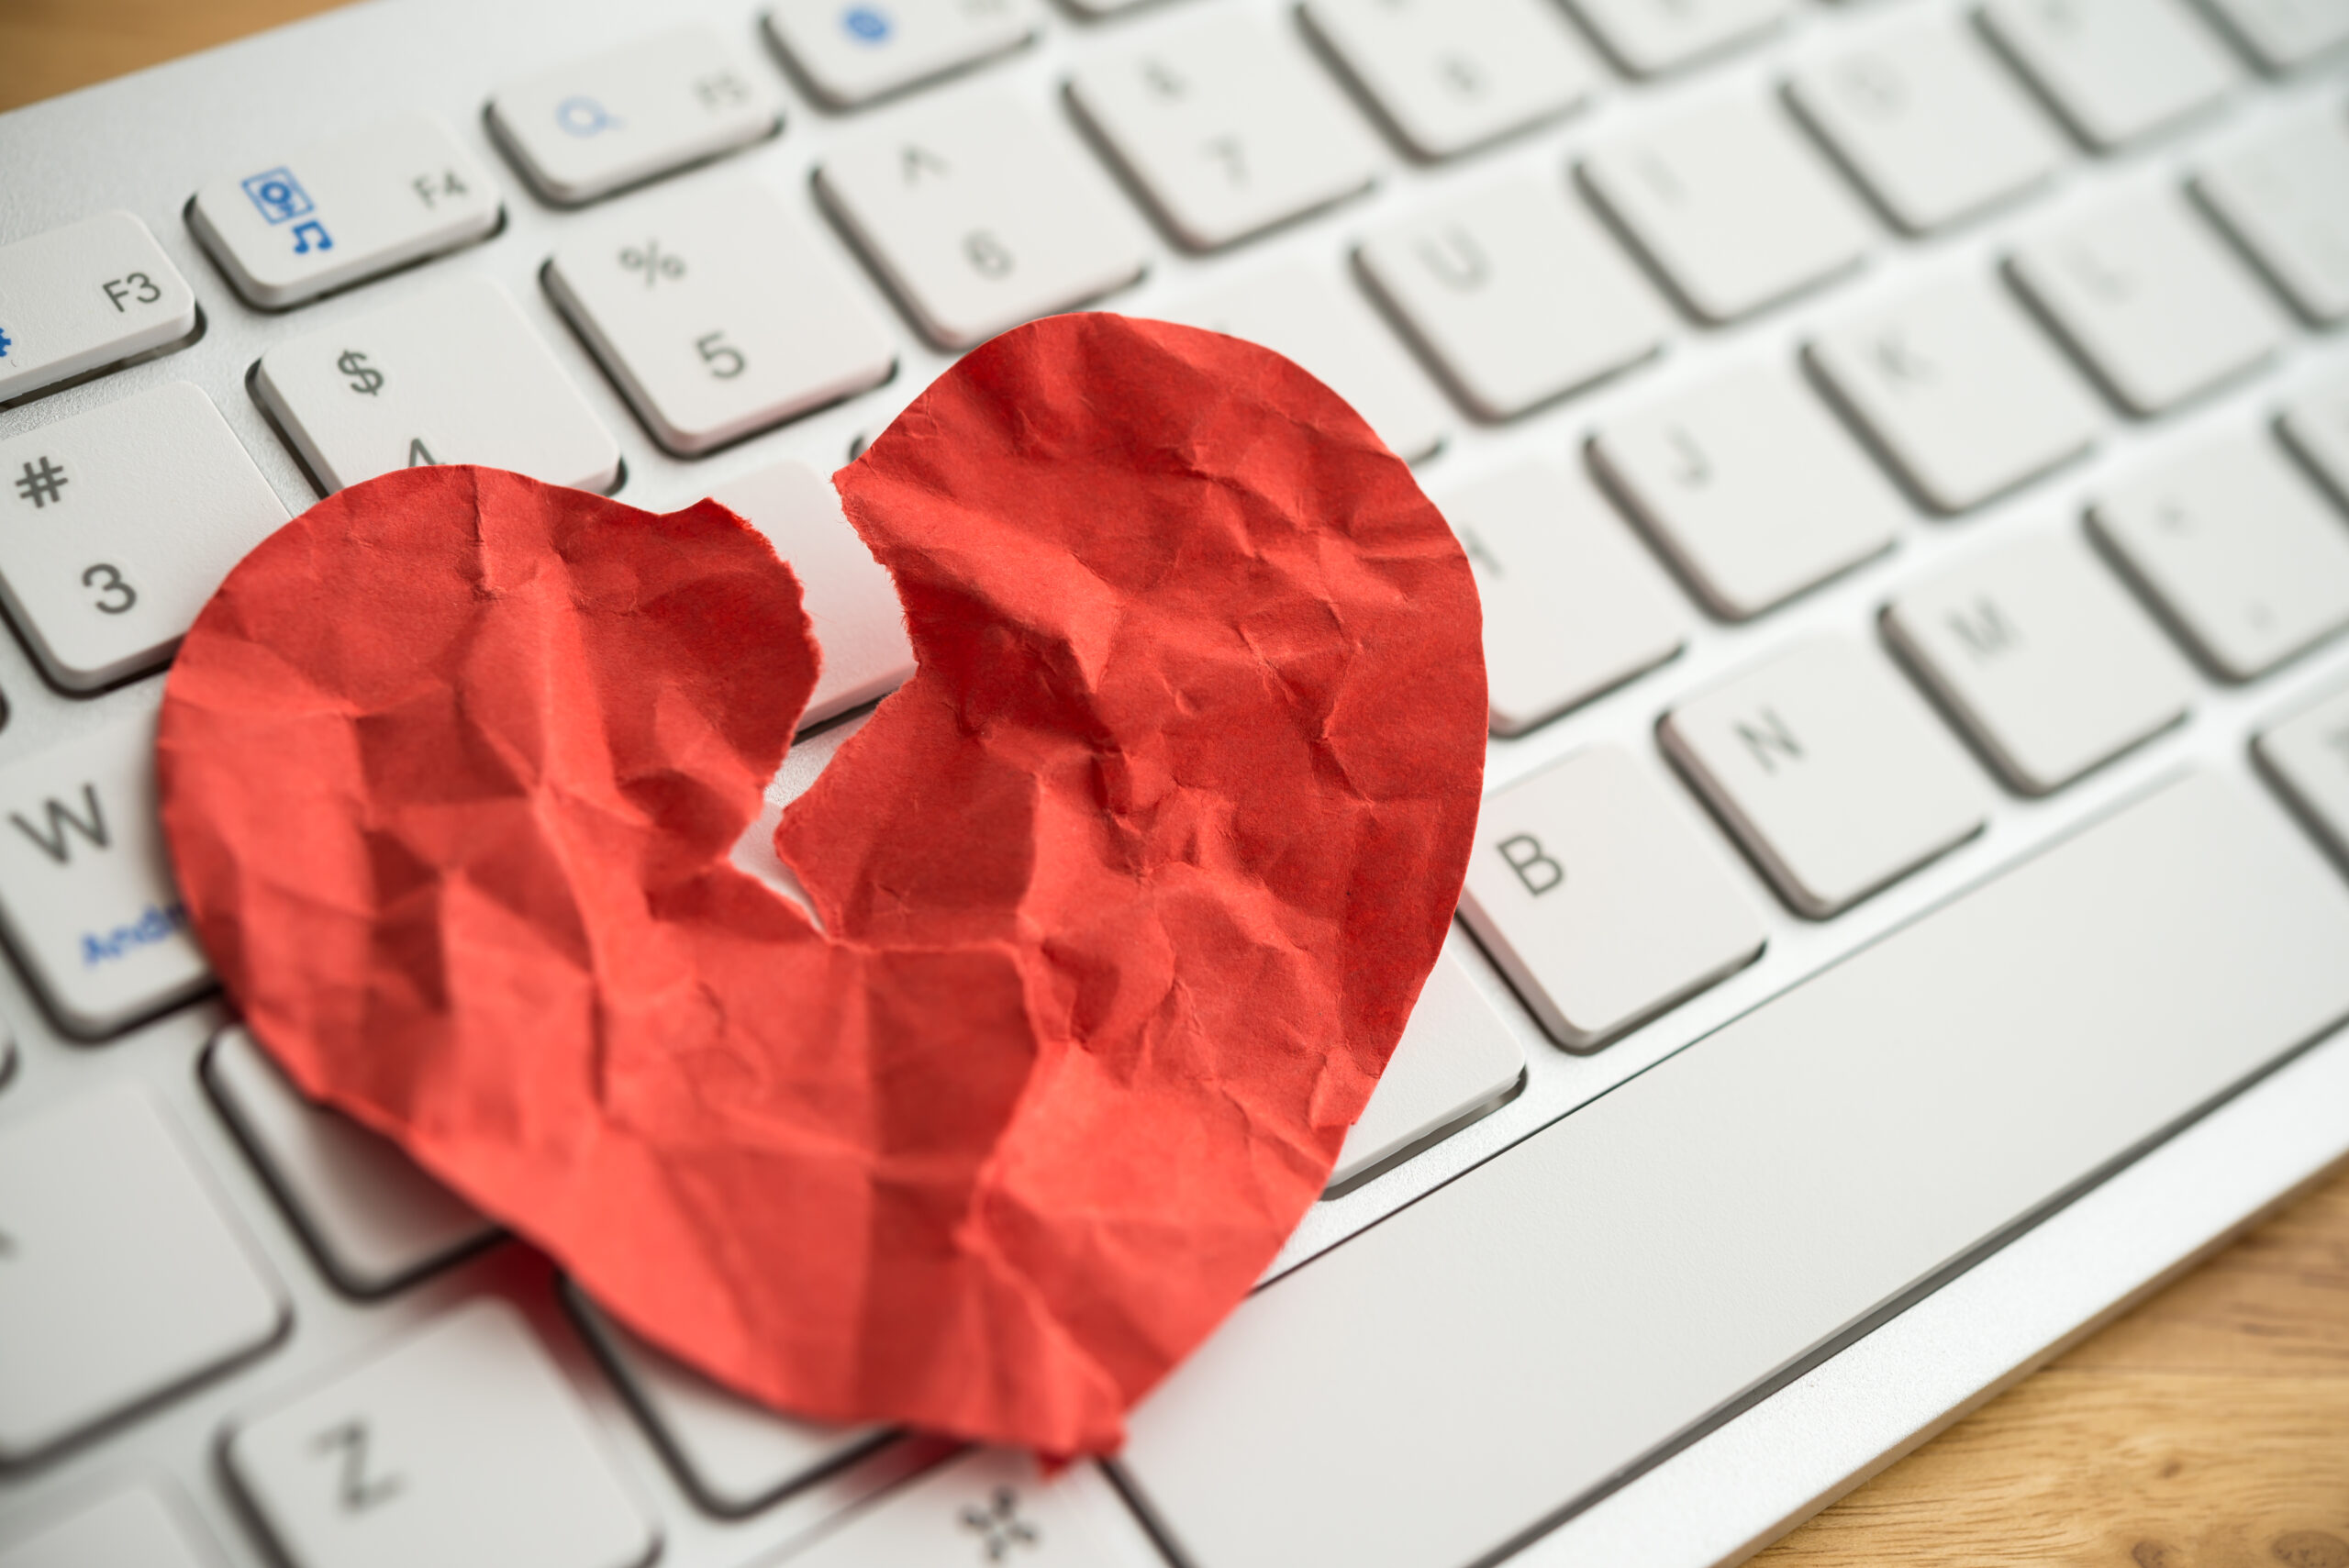 Don’t Fall for Romance Scams